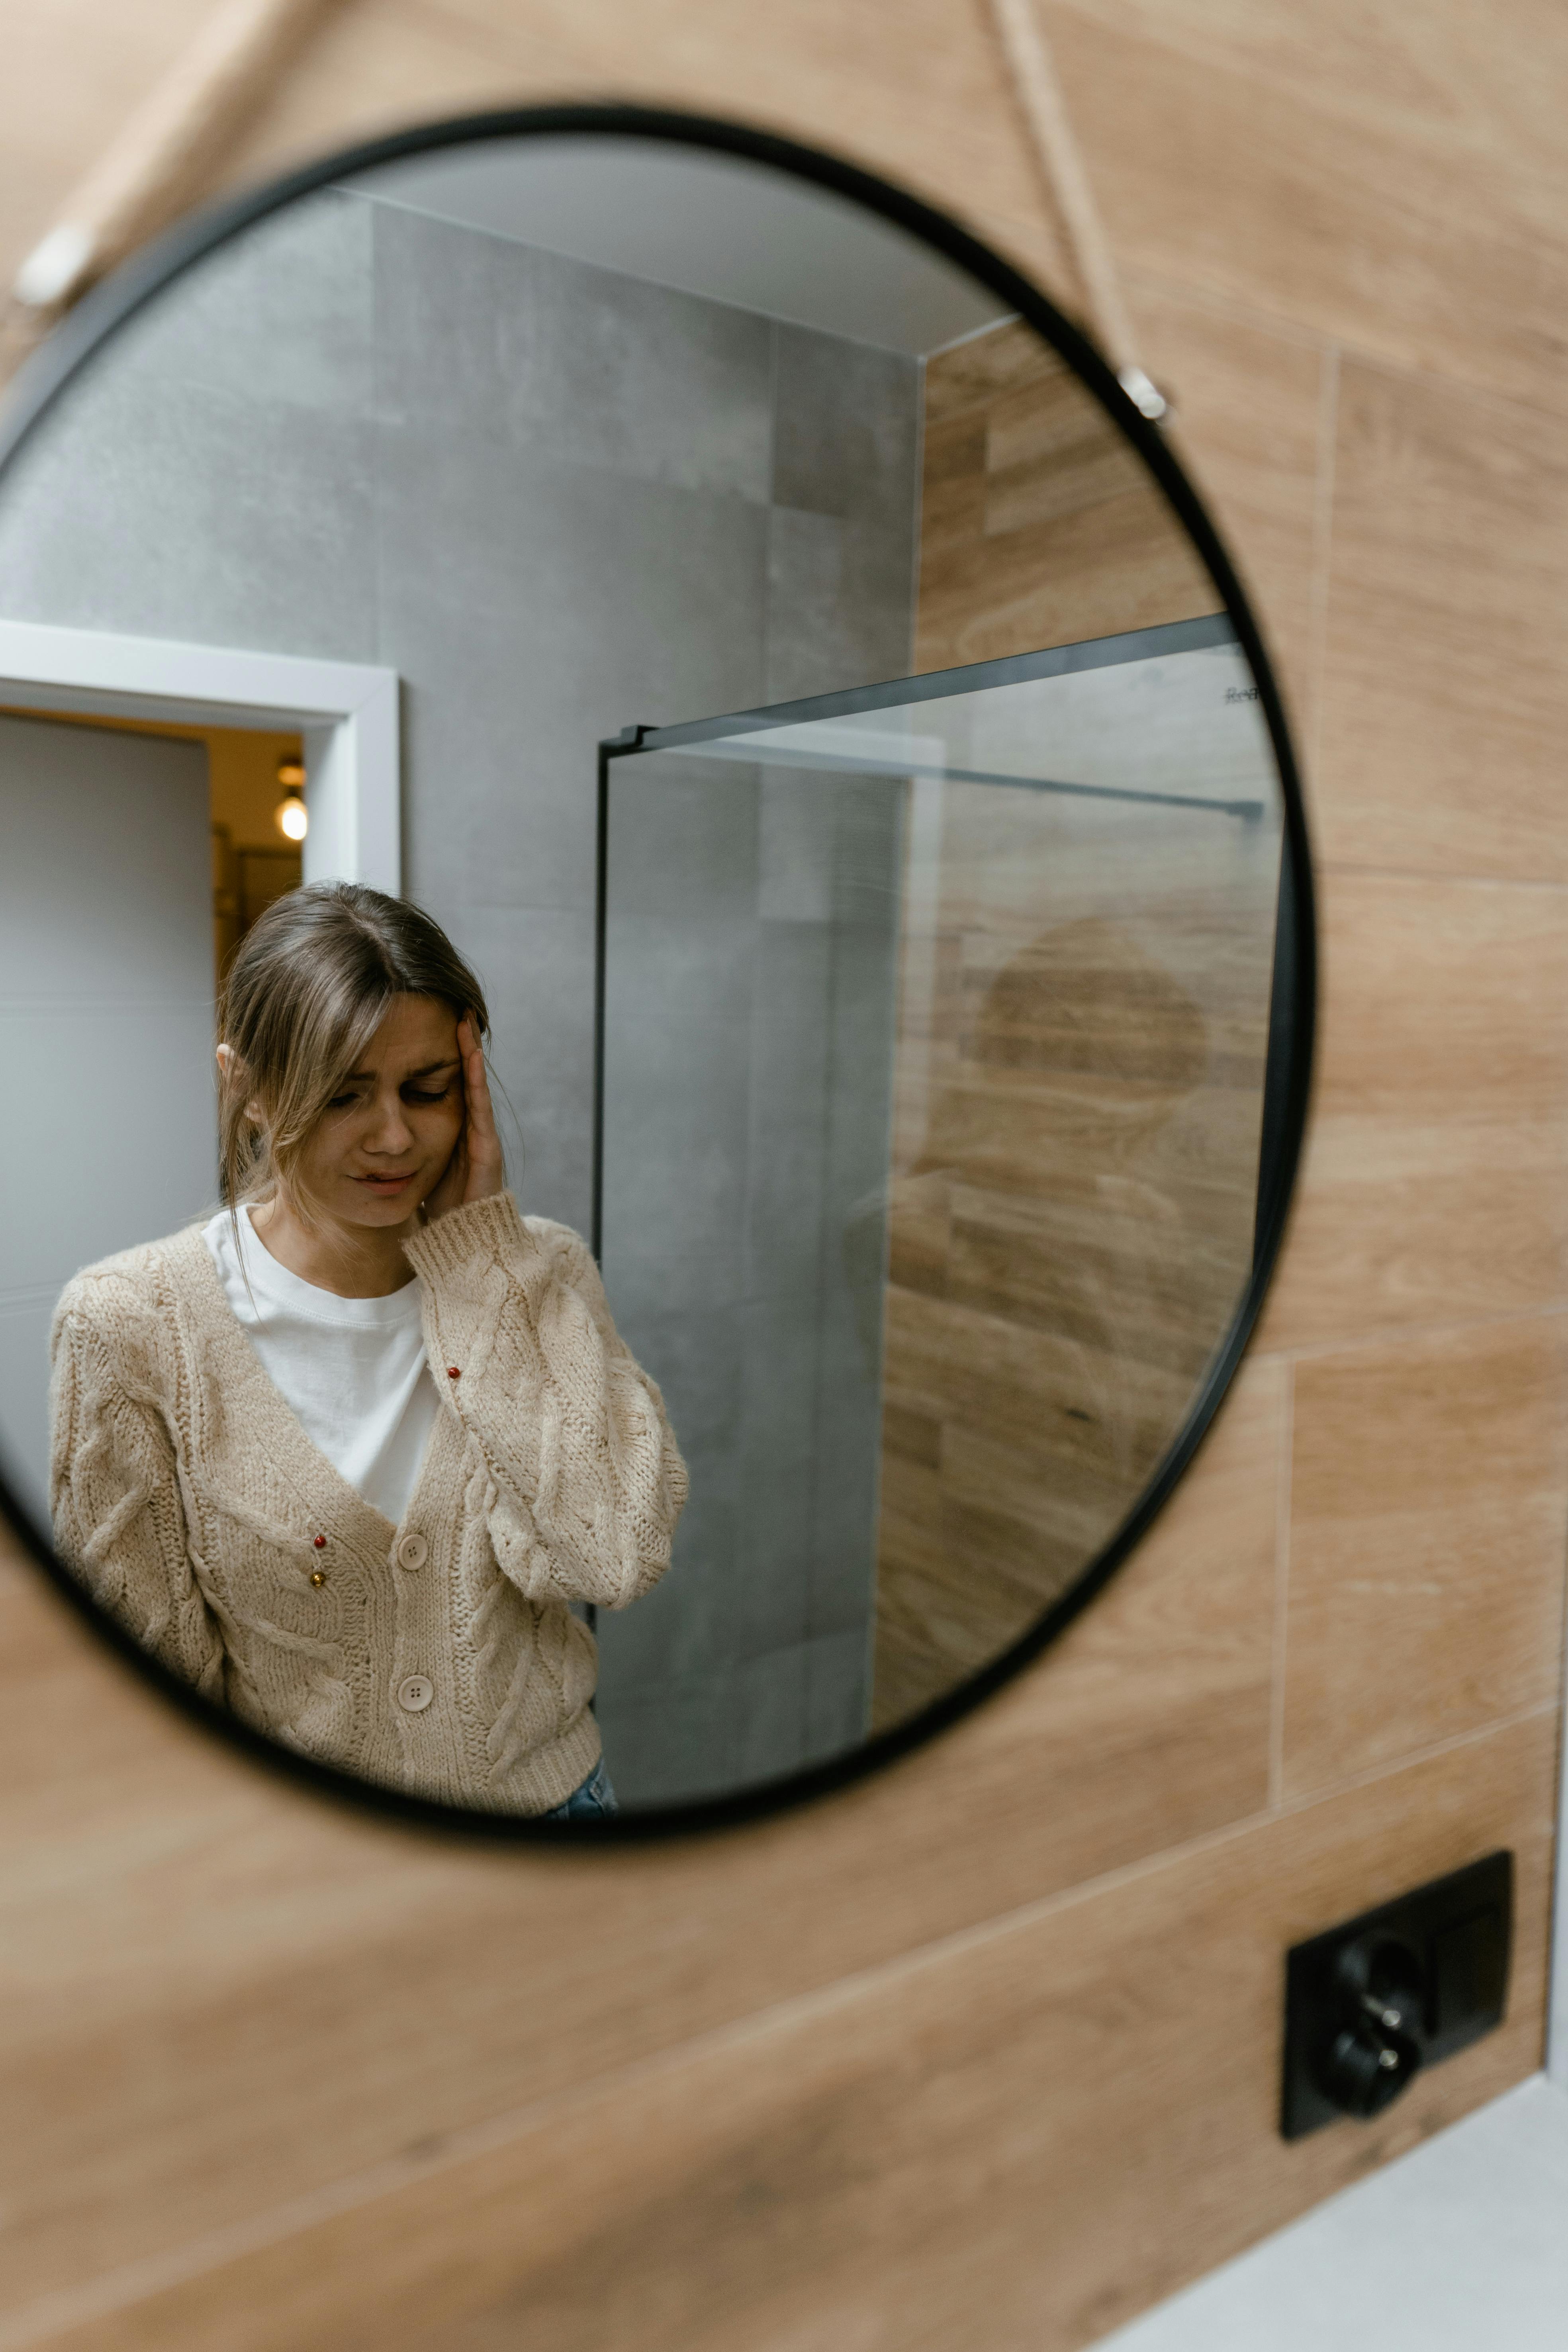 A worried woman looking into the mirror | Source: Pexels